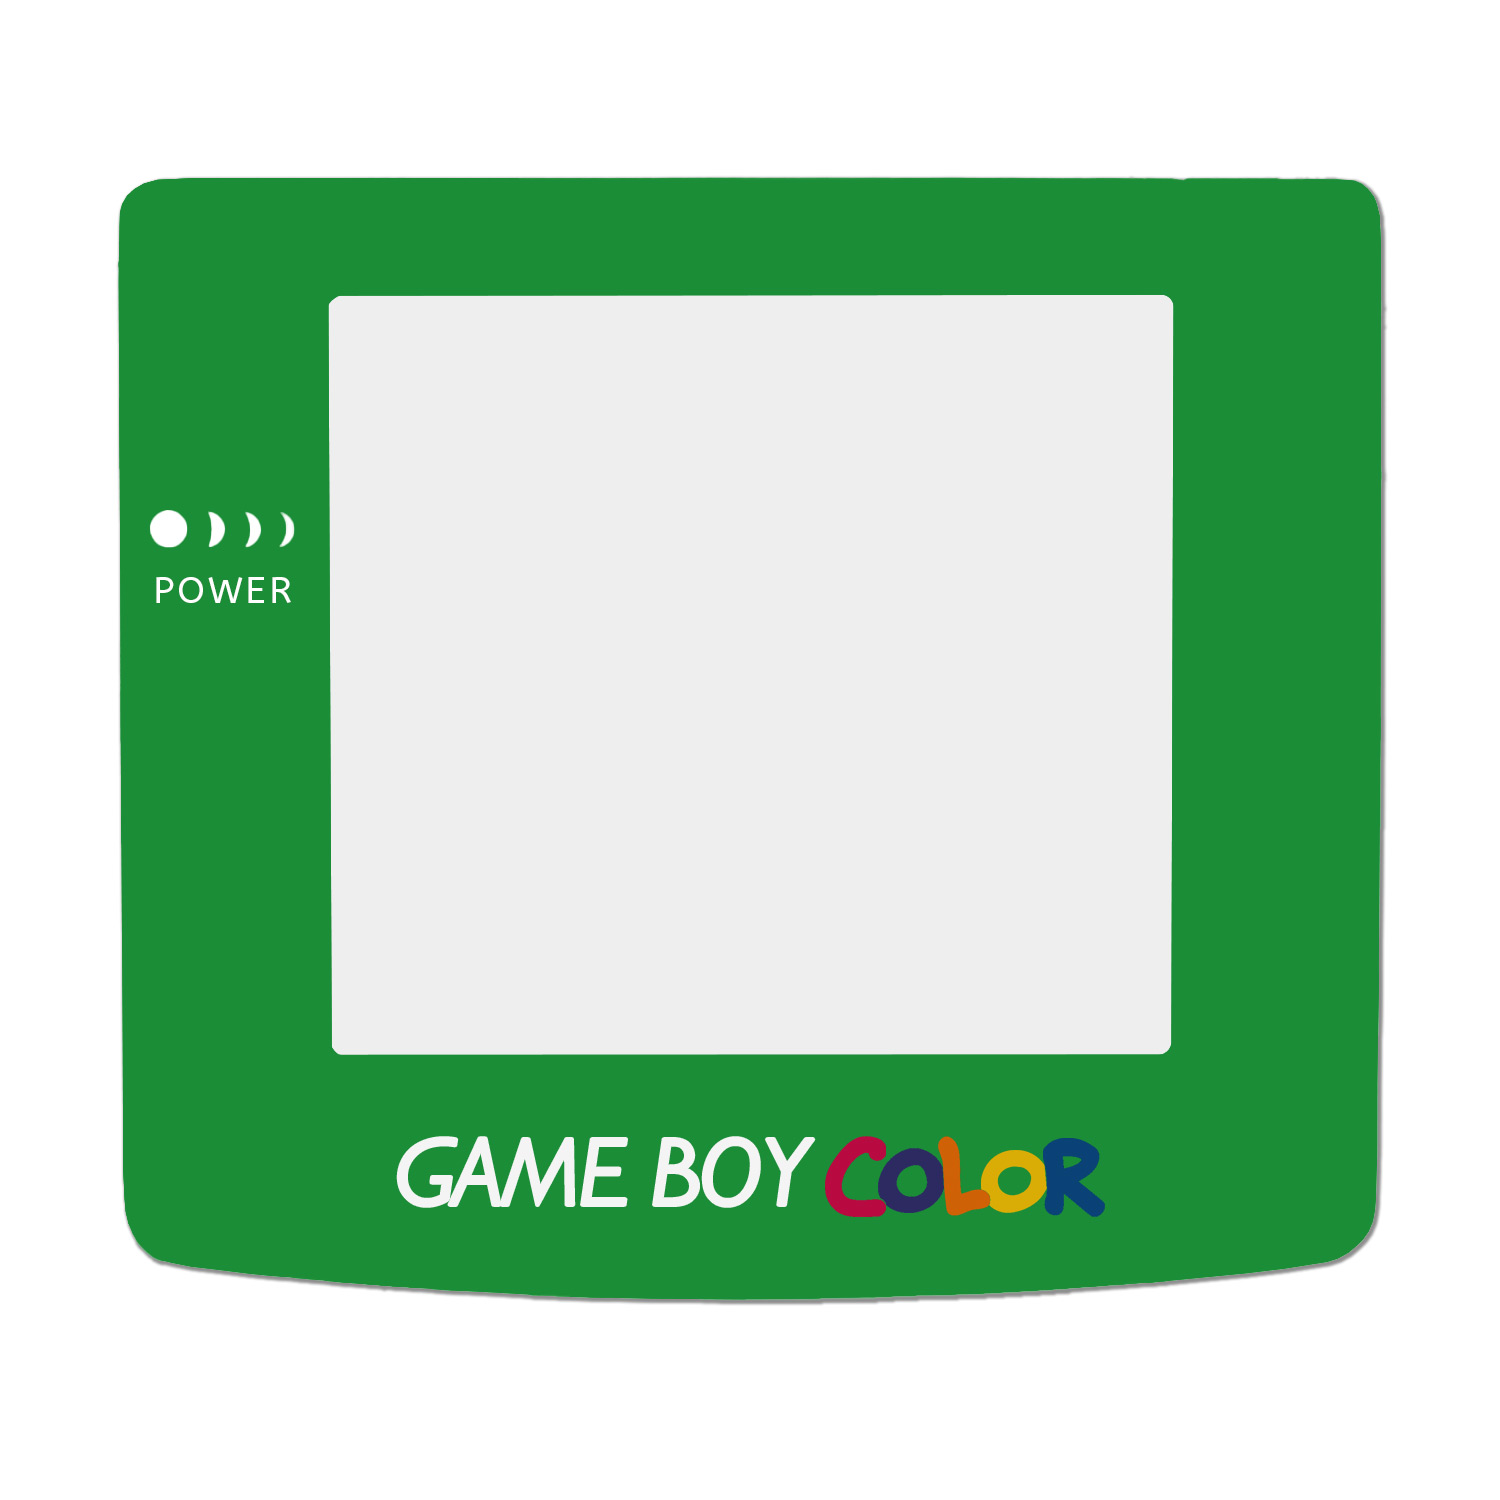 Game Boy Color Display Disc (Green)